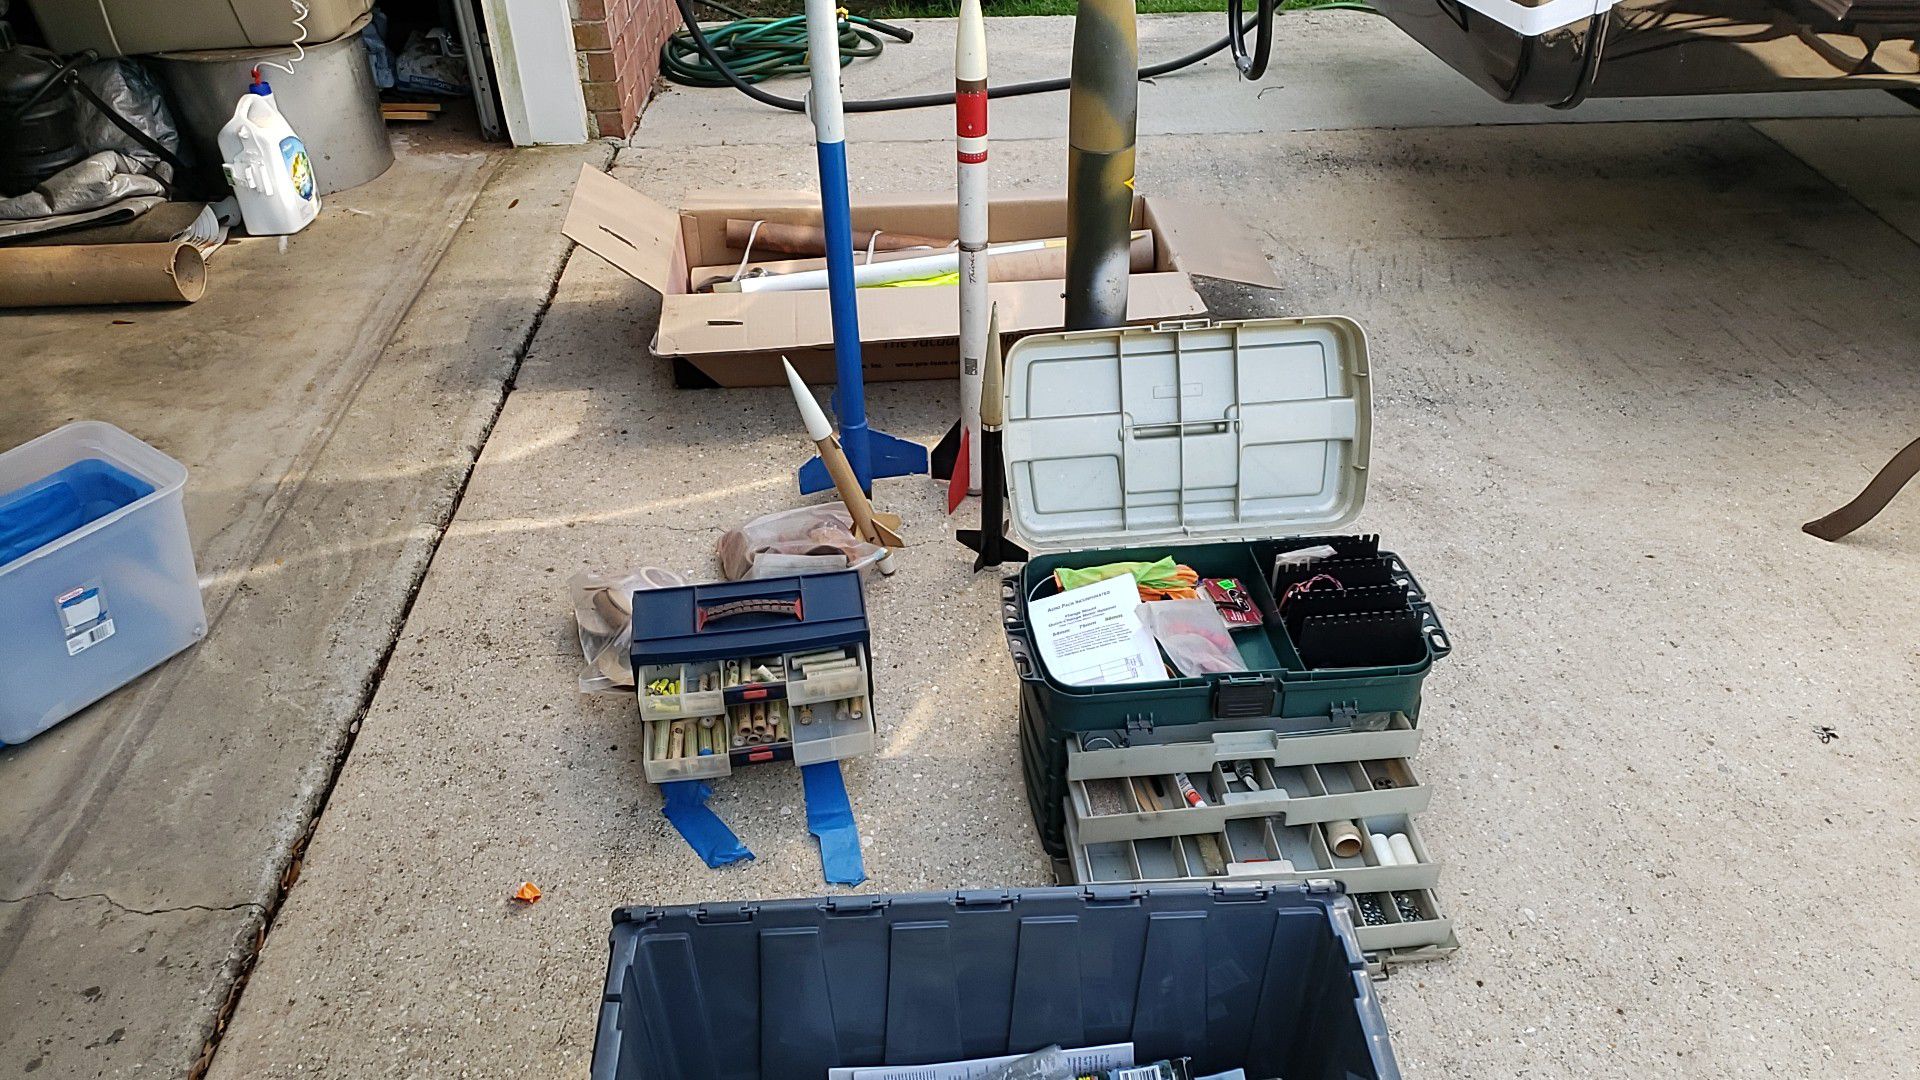 Model rockets and parts FREE